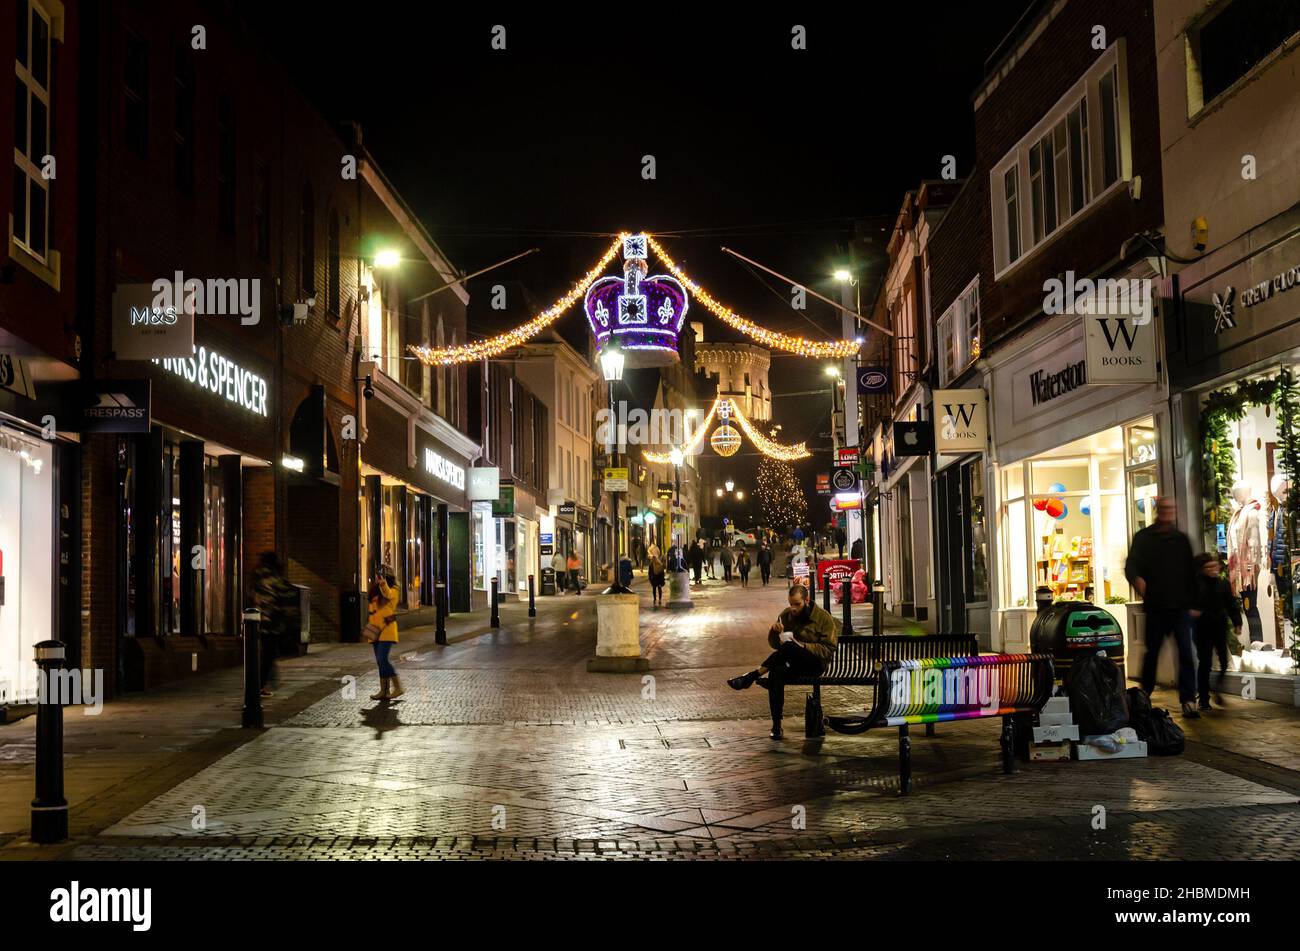 Christmas decorations lit up in the dark adorn Peascod Street in Windsor, UK during the festive season,. Stock Photo